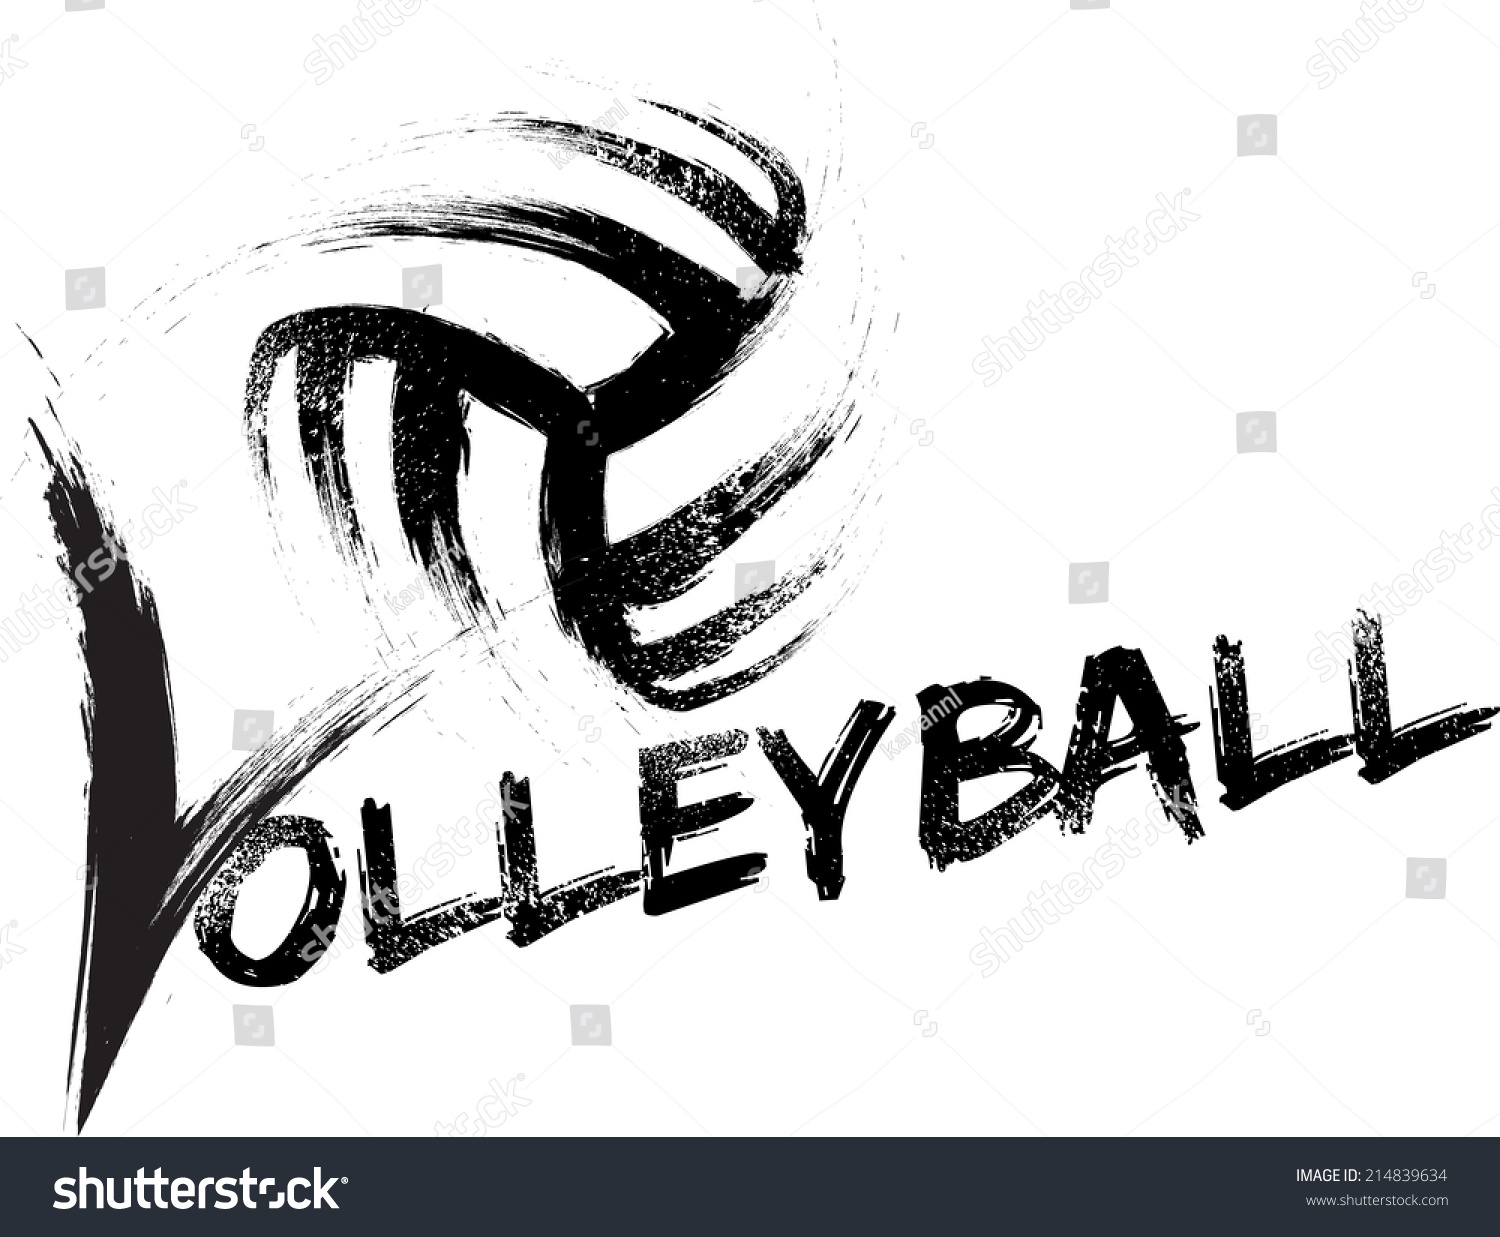 Volleyball Made Grungy Brush Swooping Through Stock Vector 214839634 ...